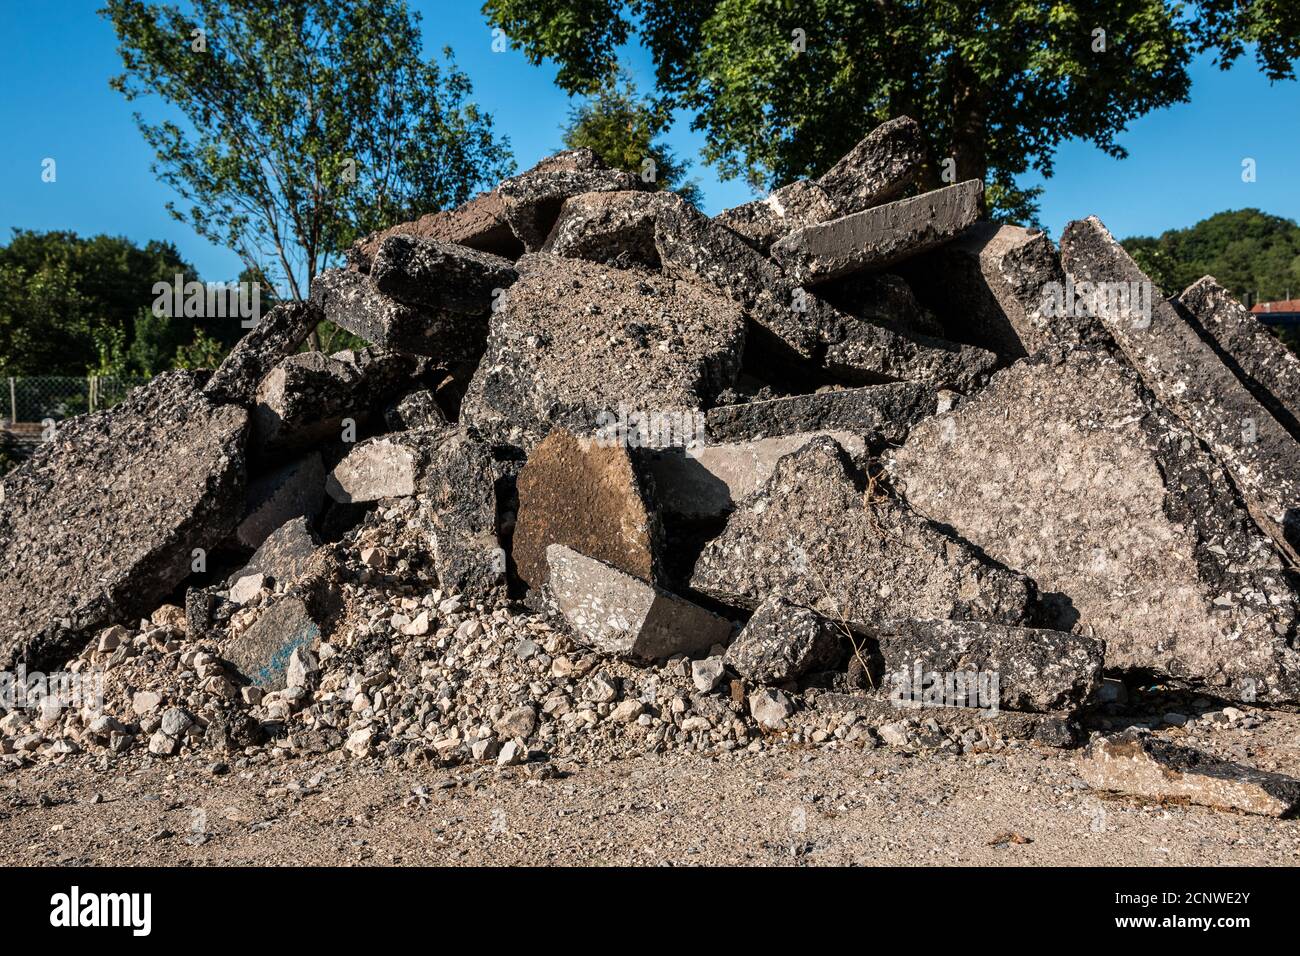 A bunch of building waste on the ground Stock Photo